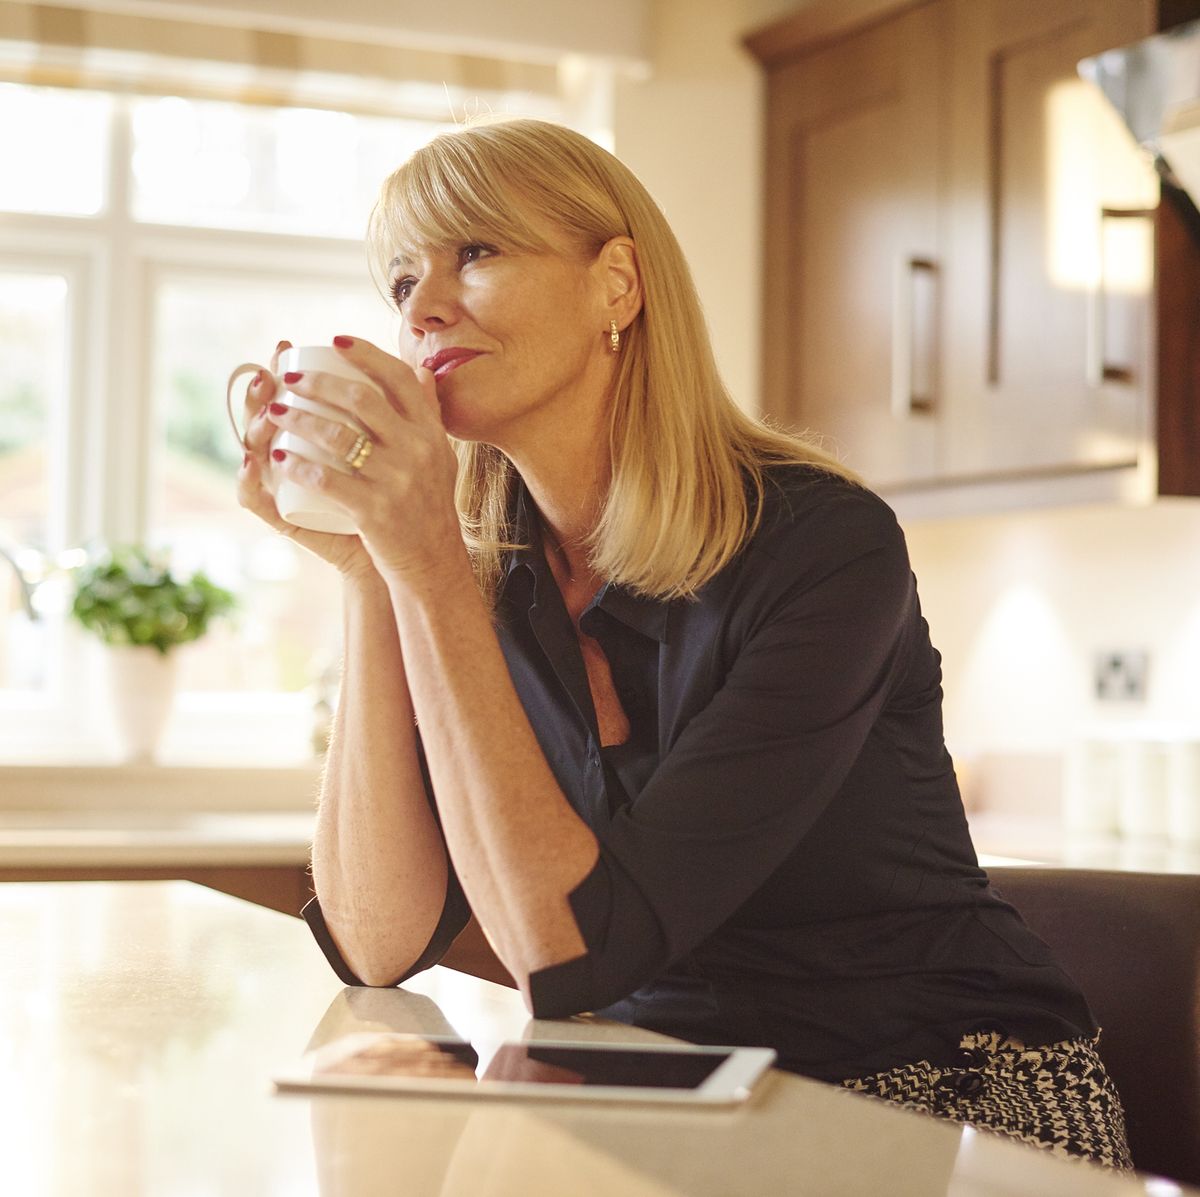 15 Clear Signs An Older Woman Wants You